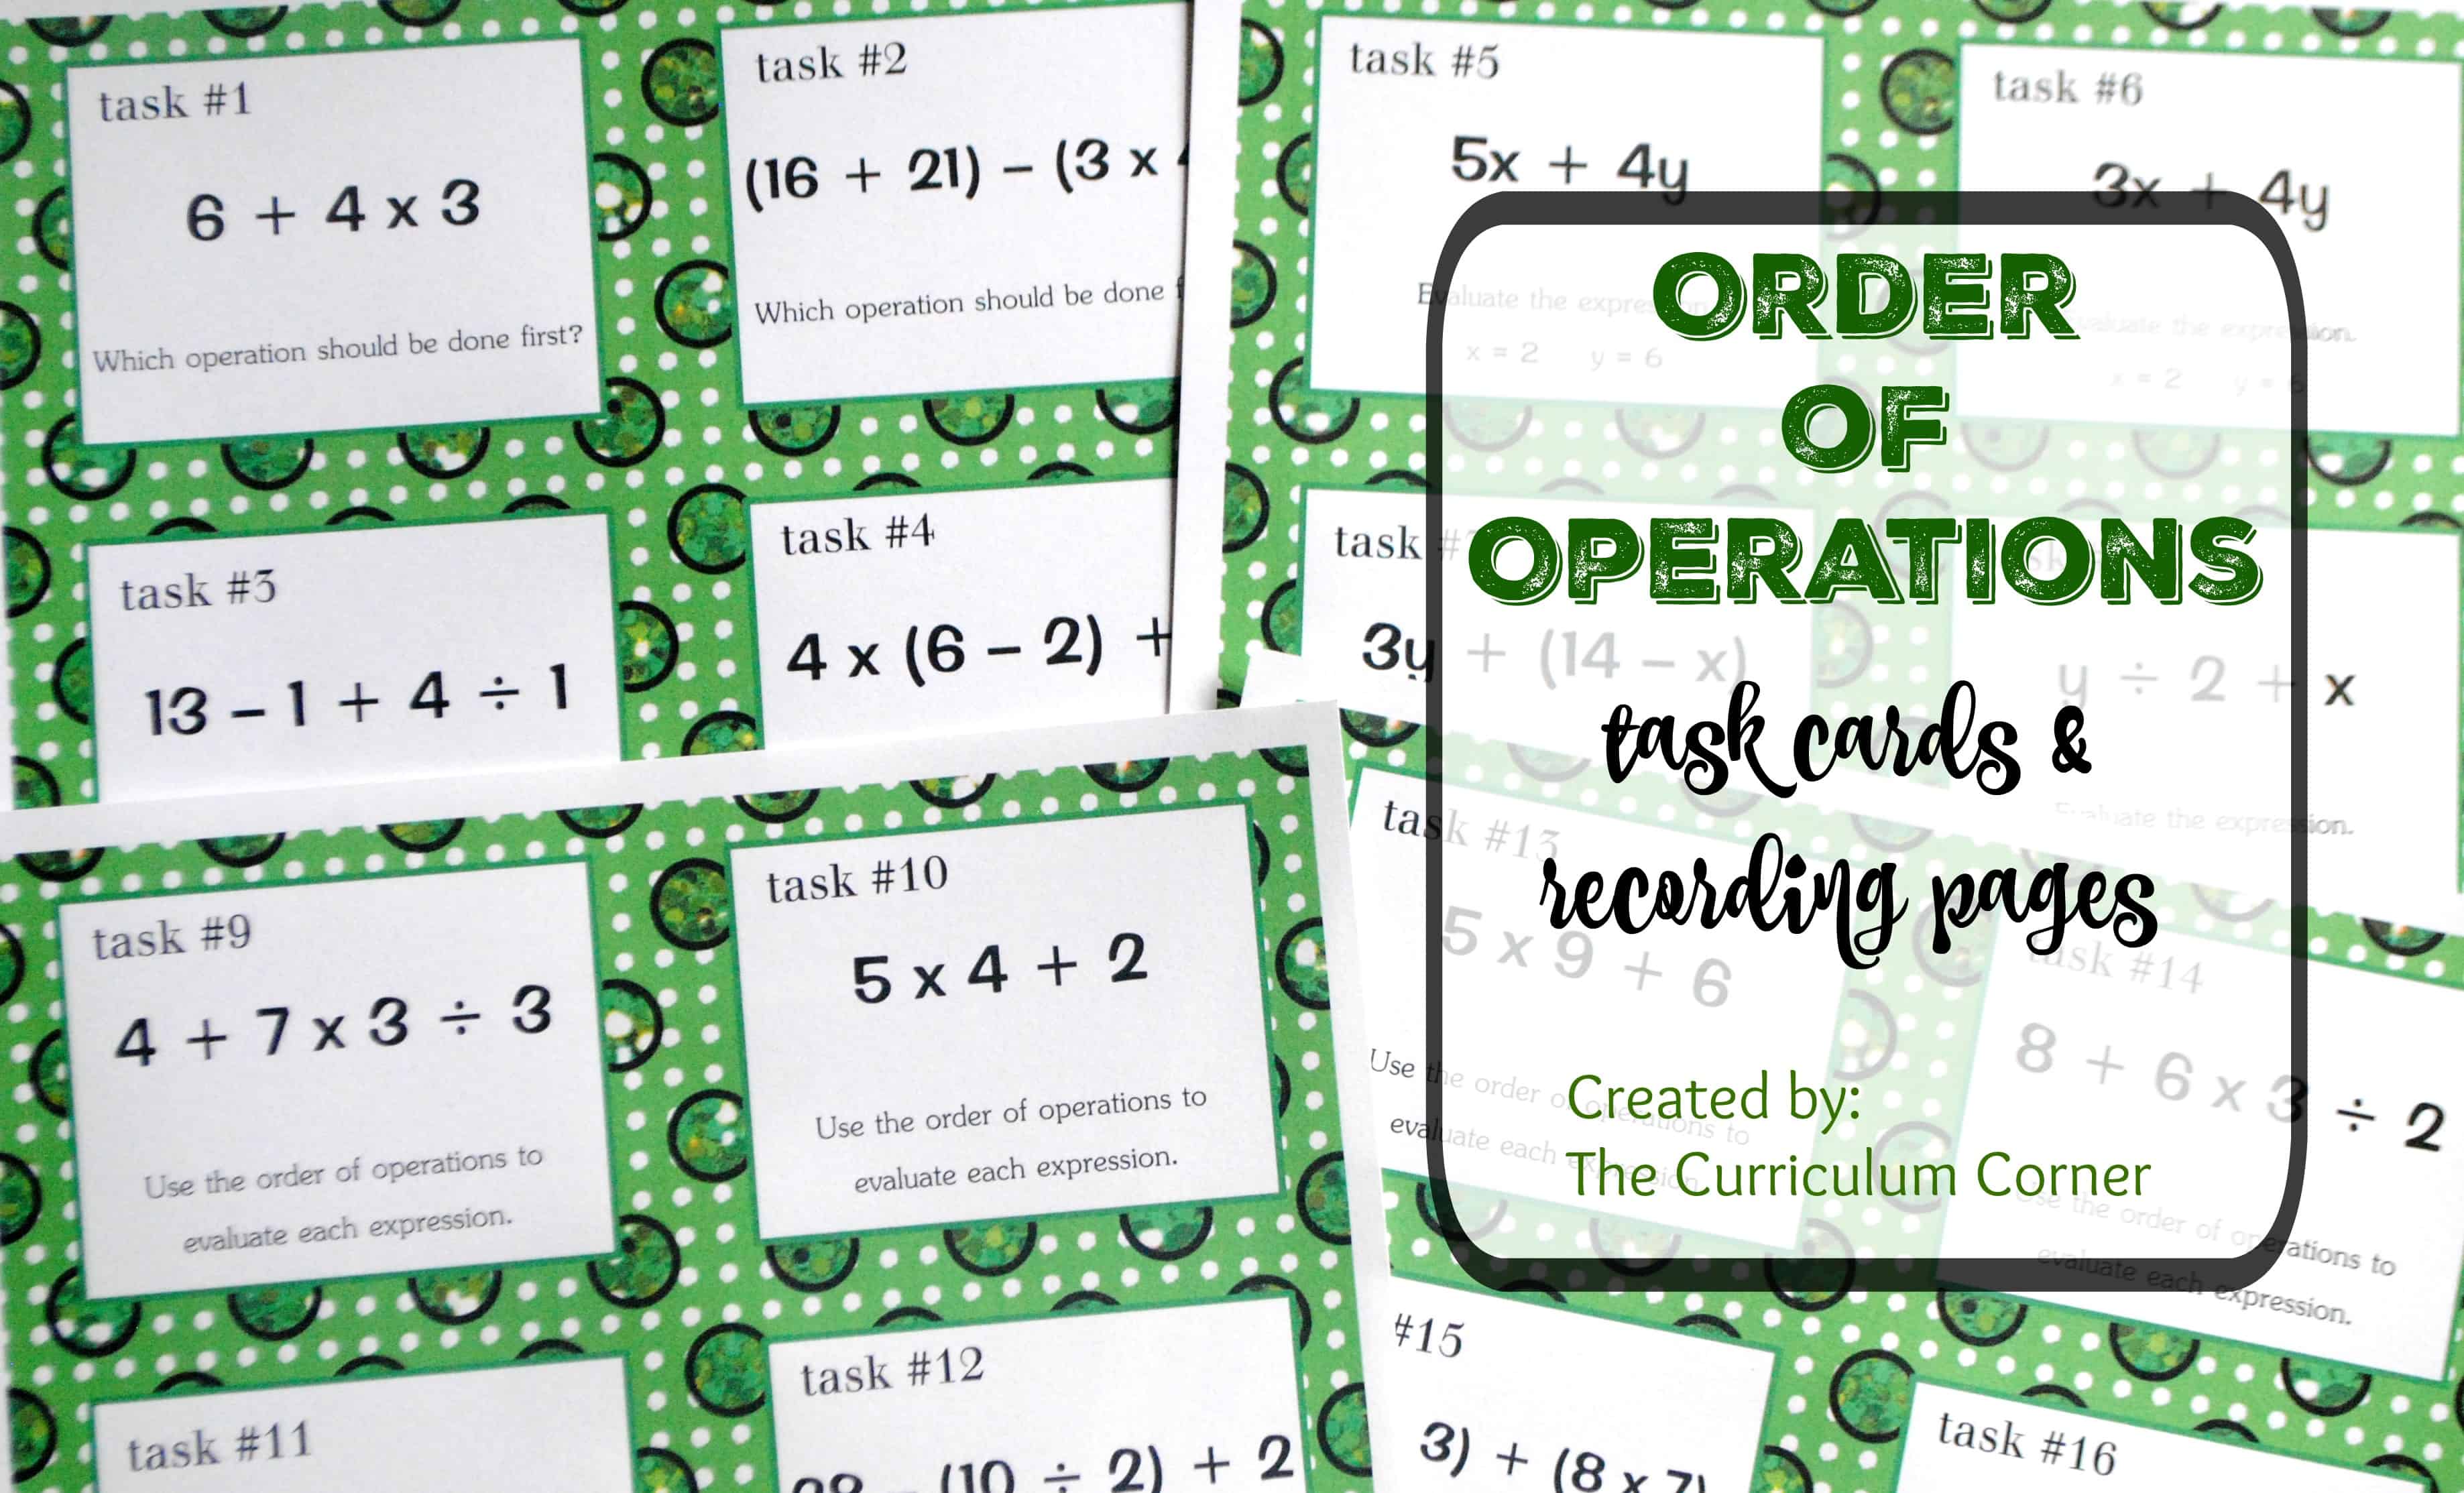 order-of-operations-task-cards-the-curriculum-corner-4-5-6